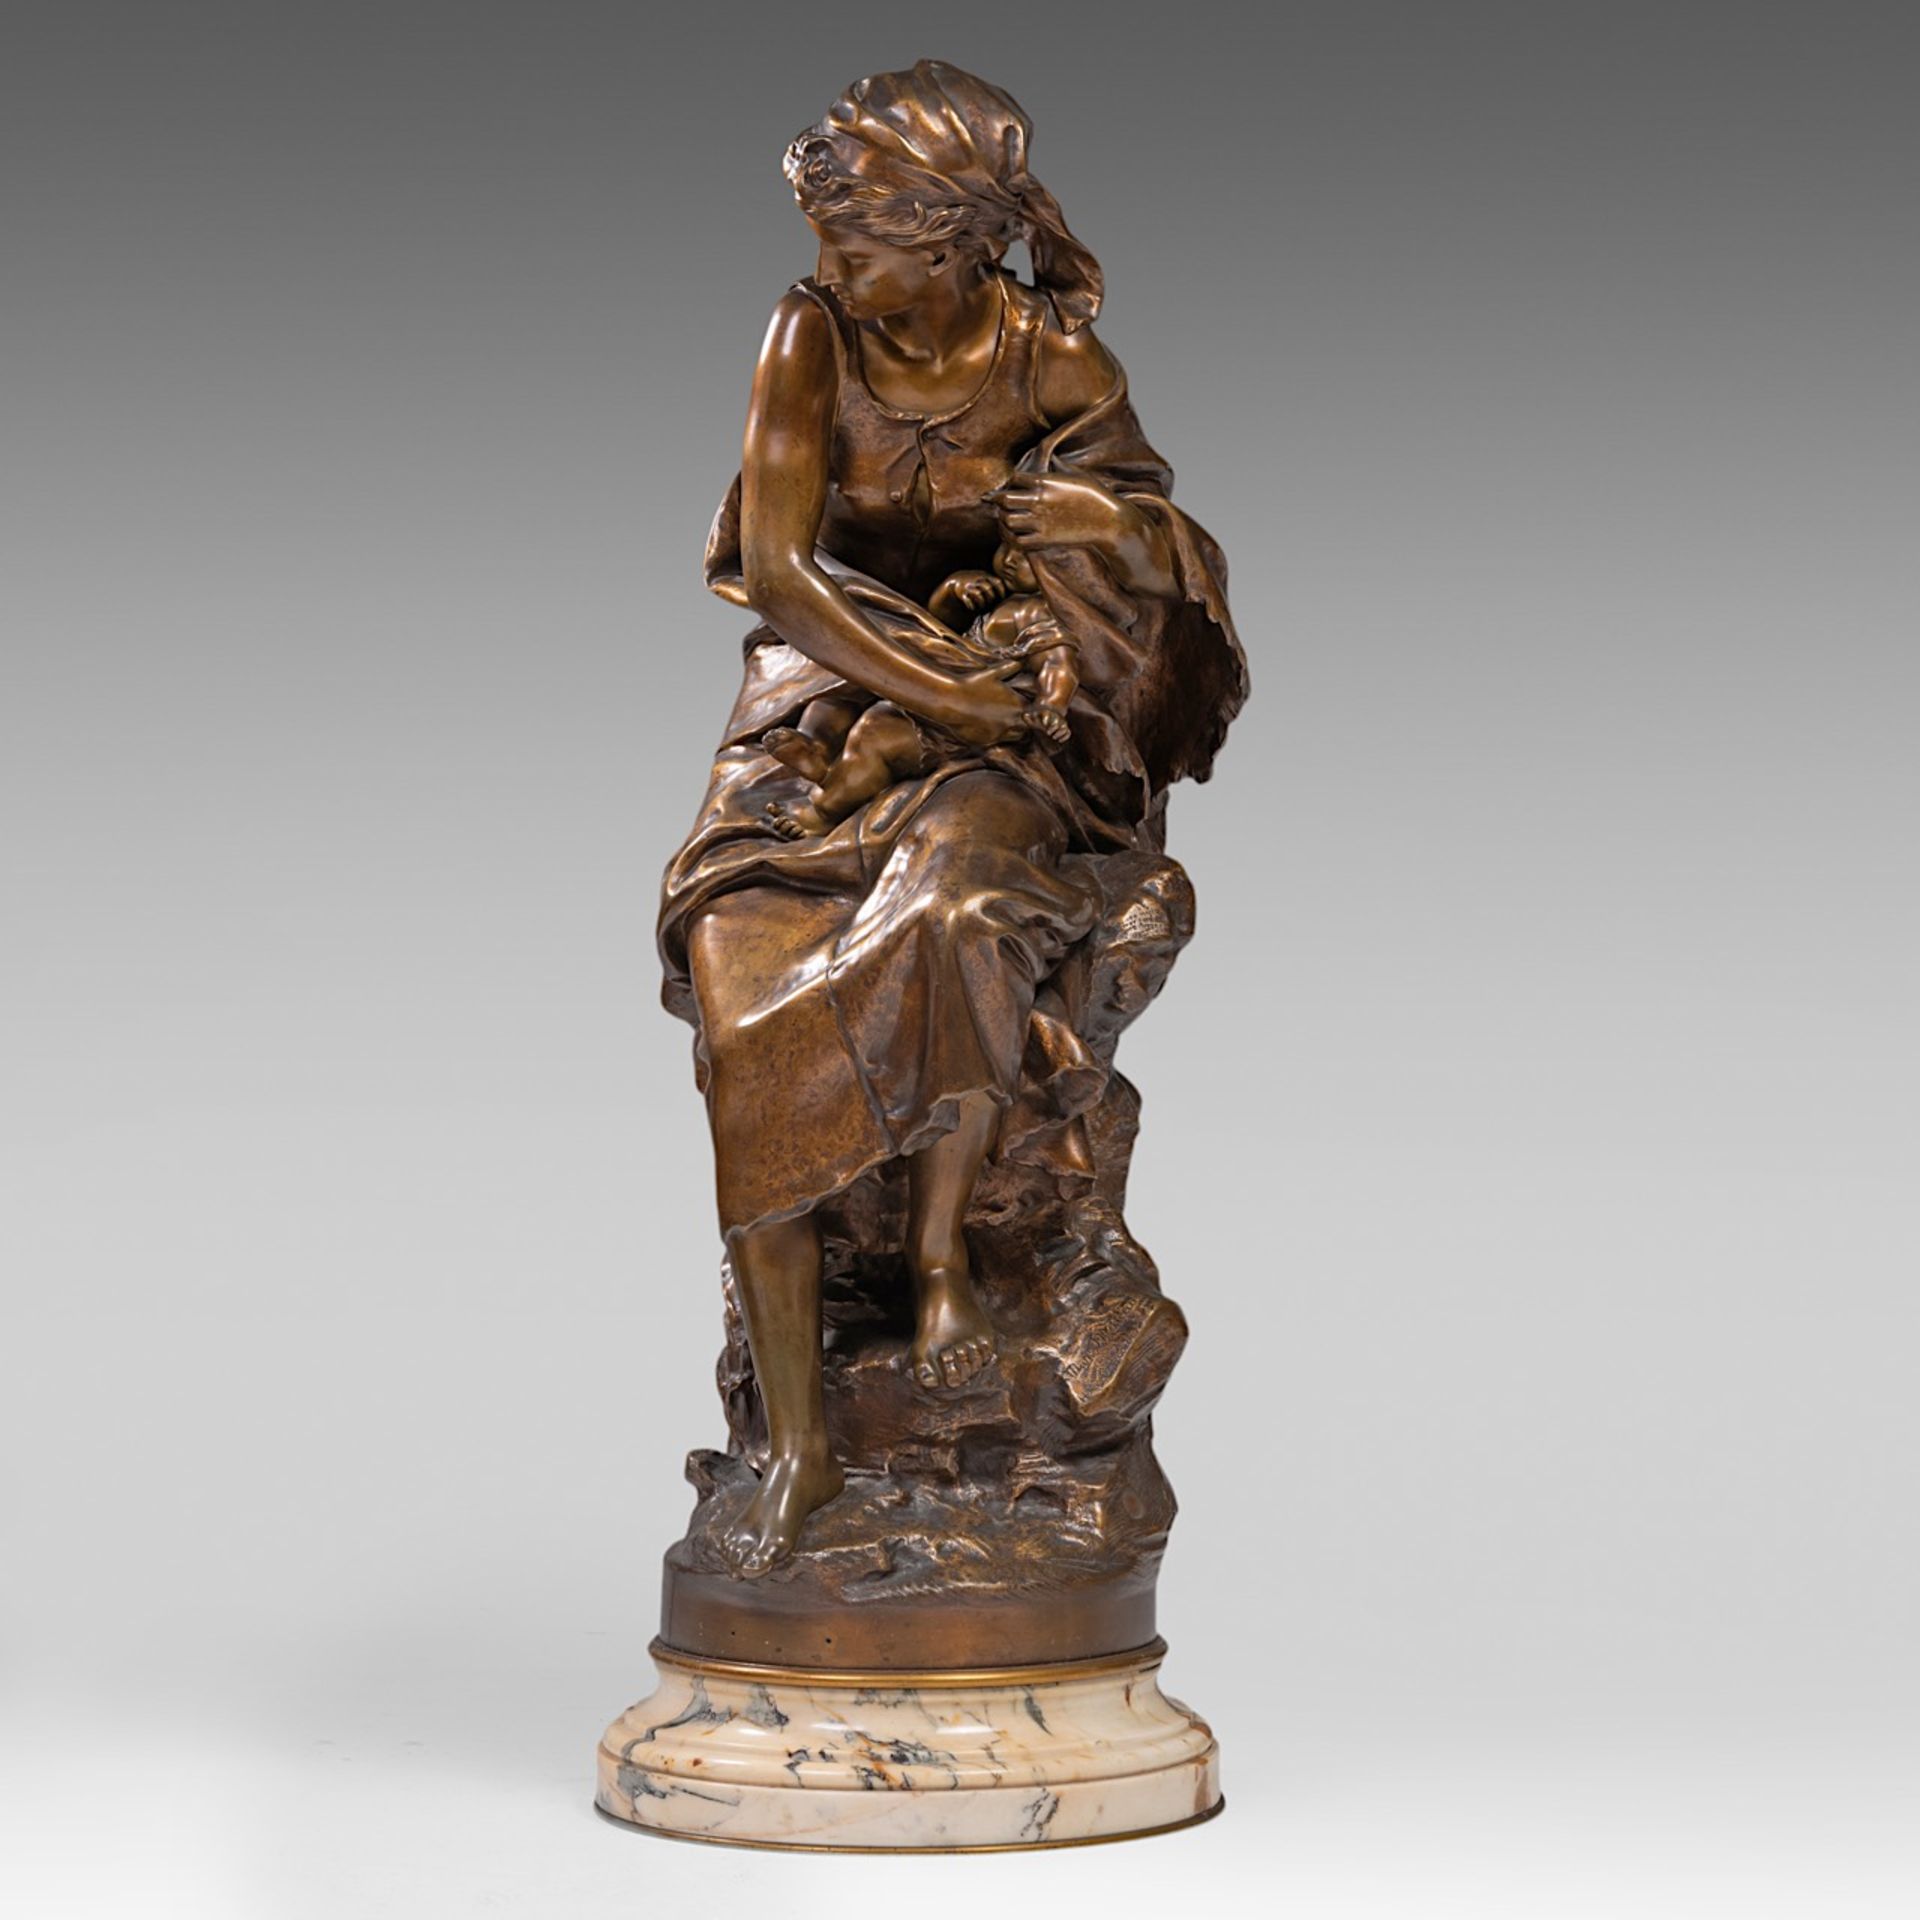 Mathurin Moreau (1822-1912), patinated bronze on a marble base, H 96 cm (total)